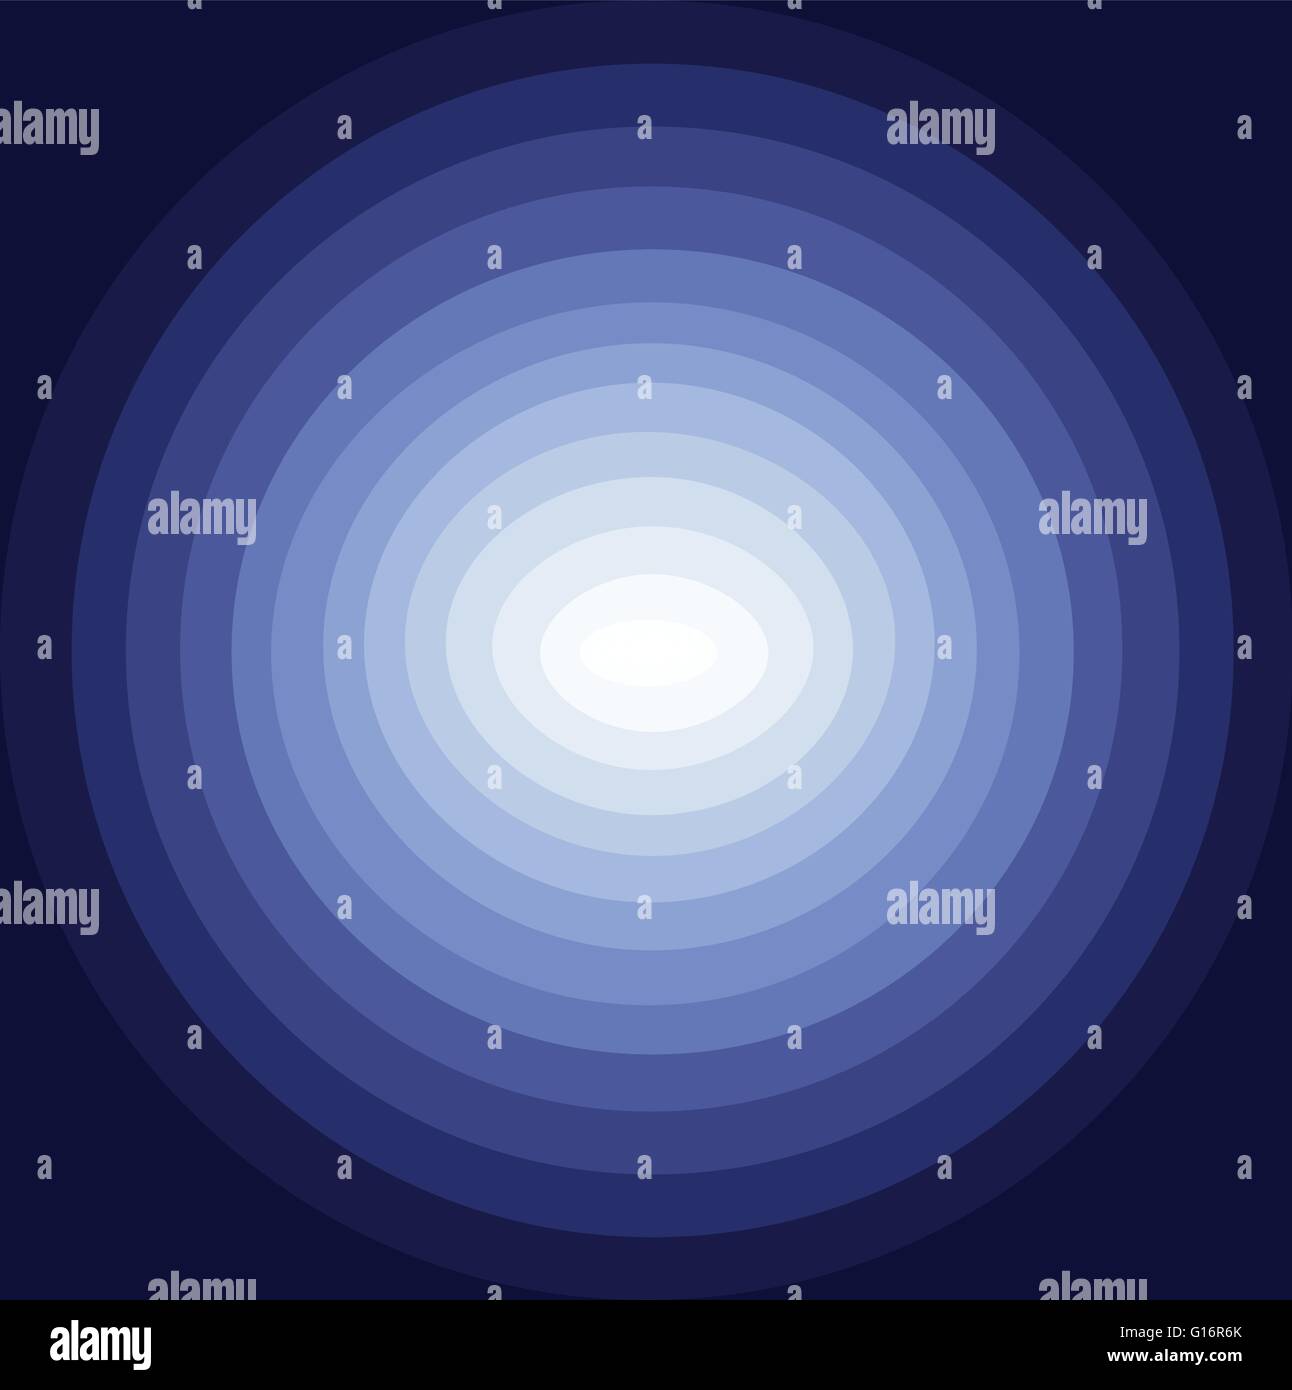 Spin image Stock Vector Images - Alamy